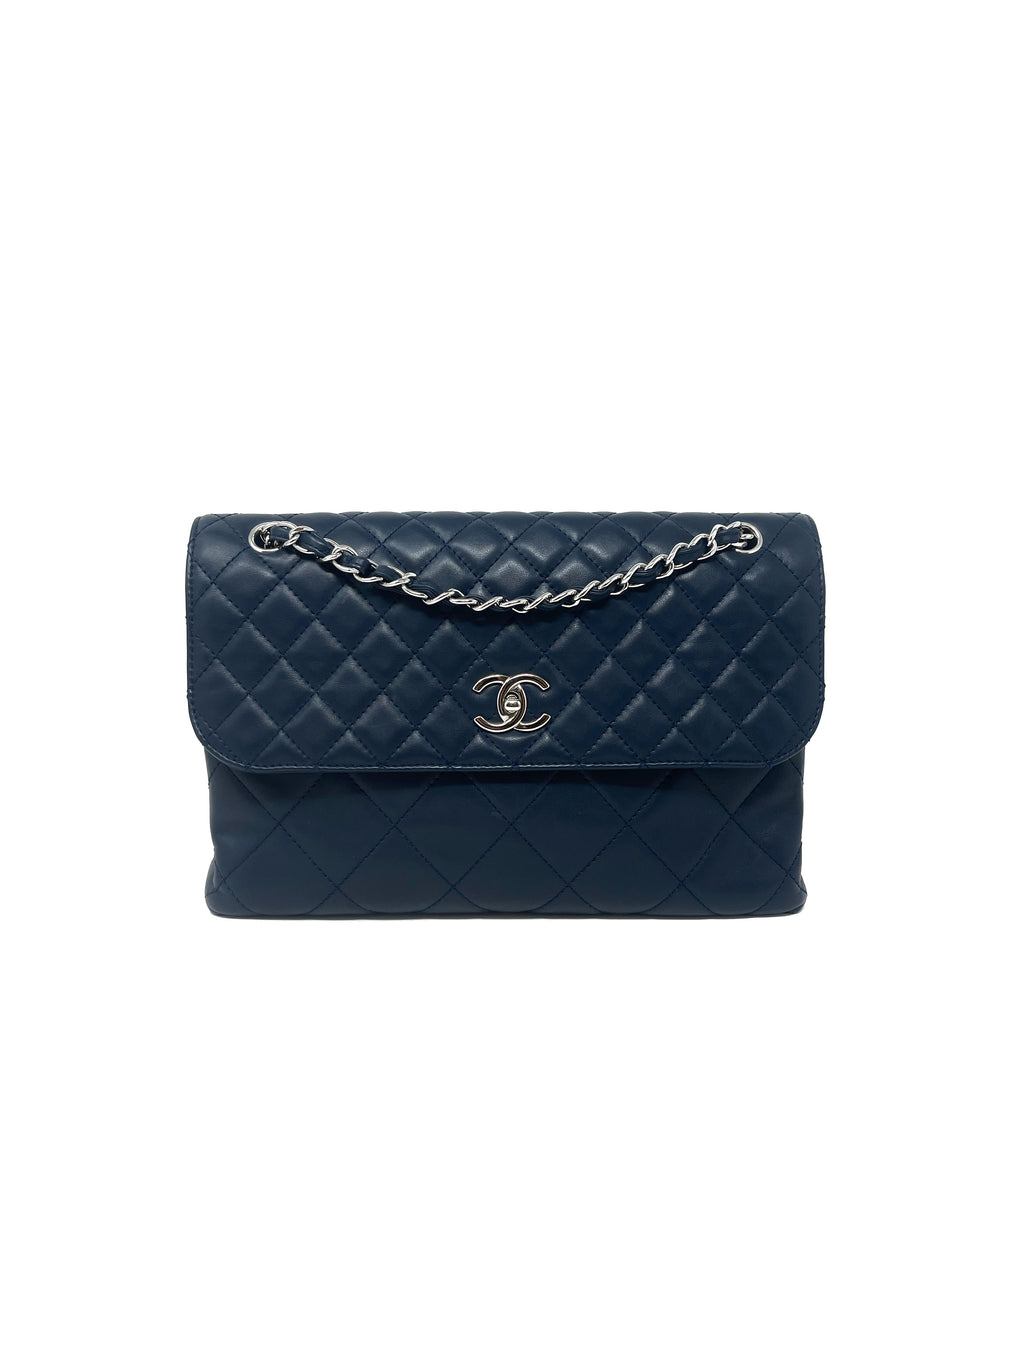 chanel business flap